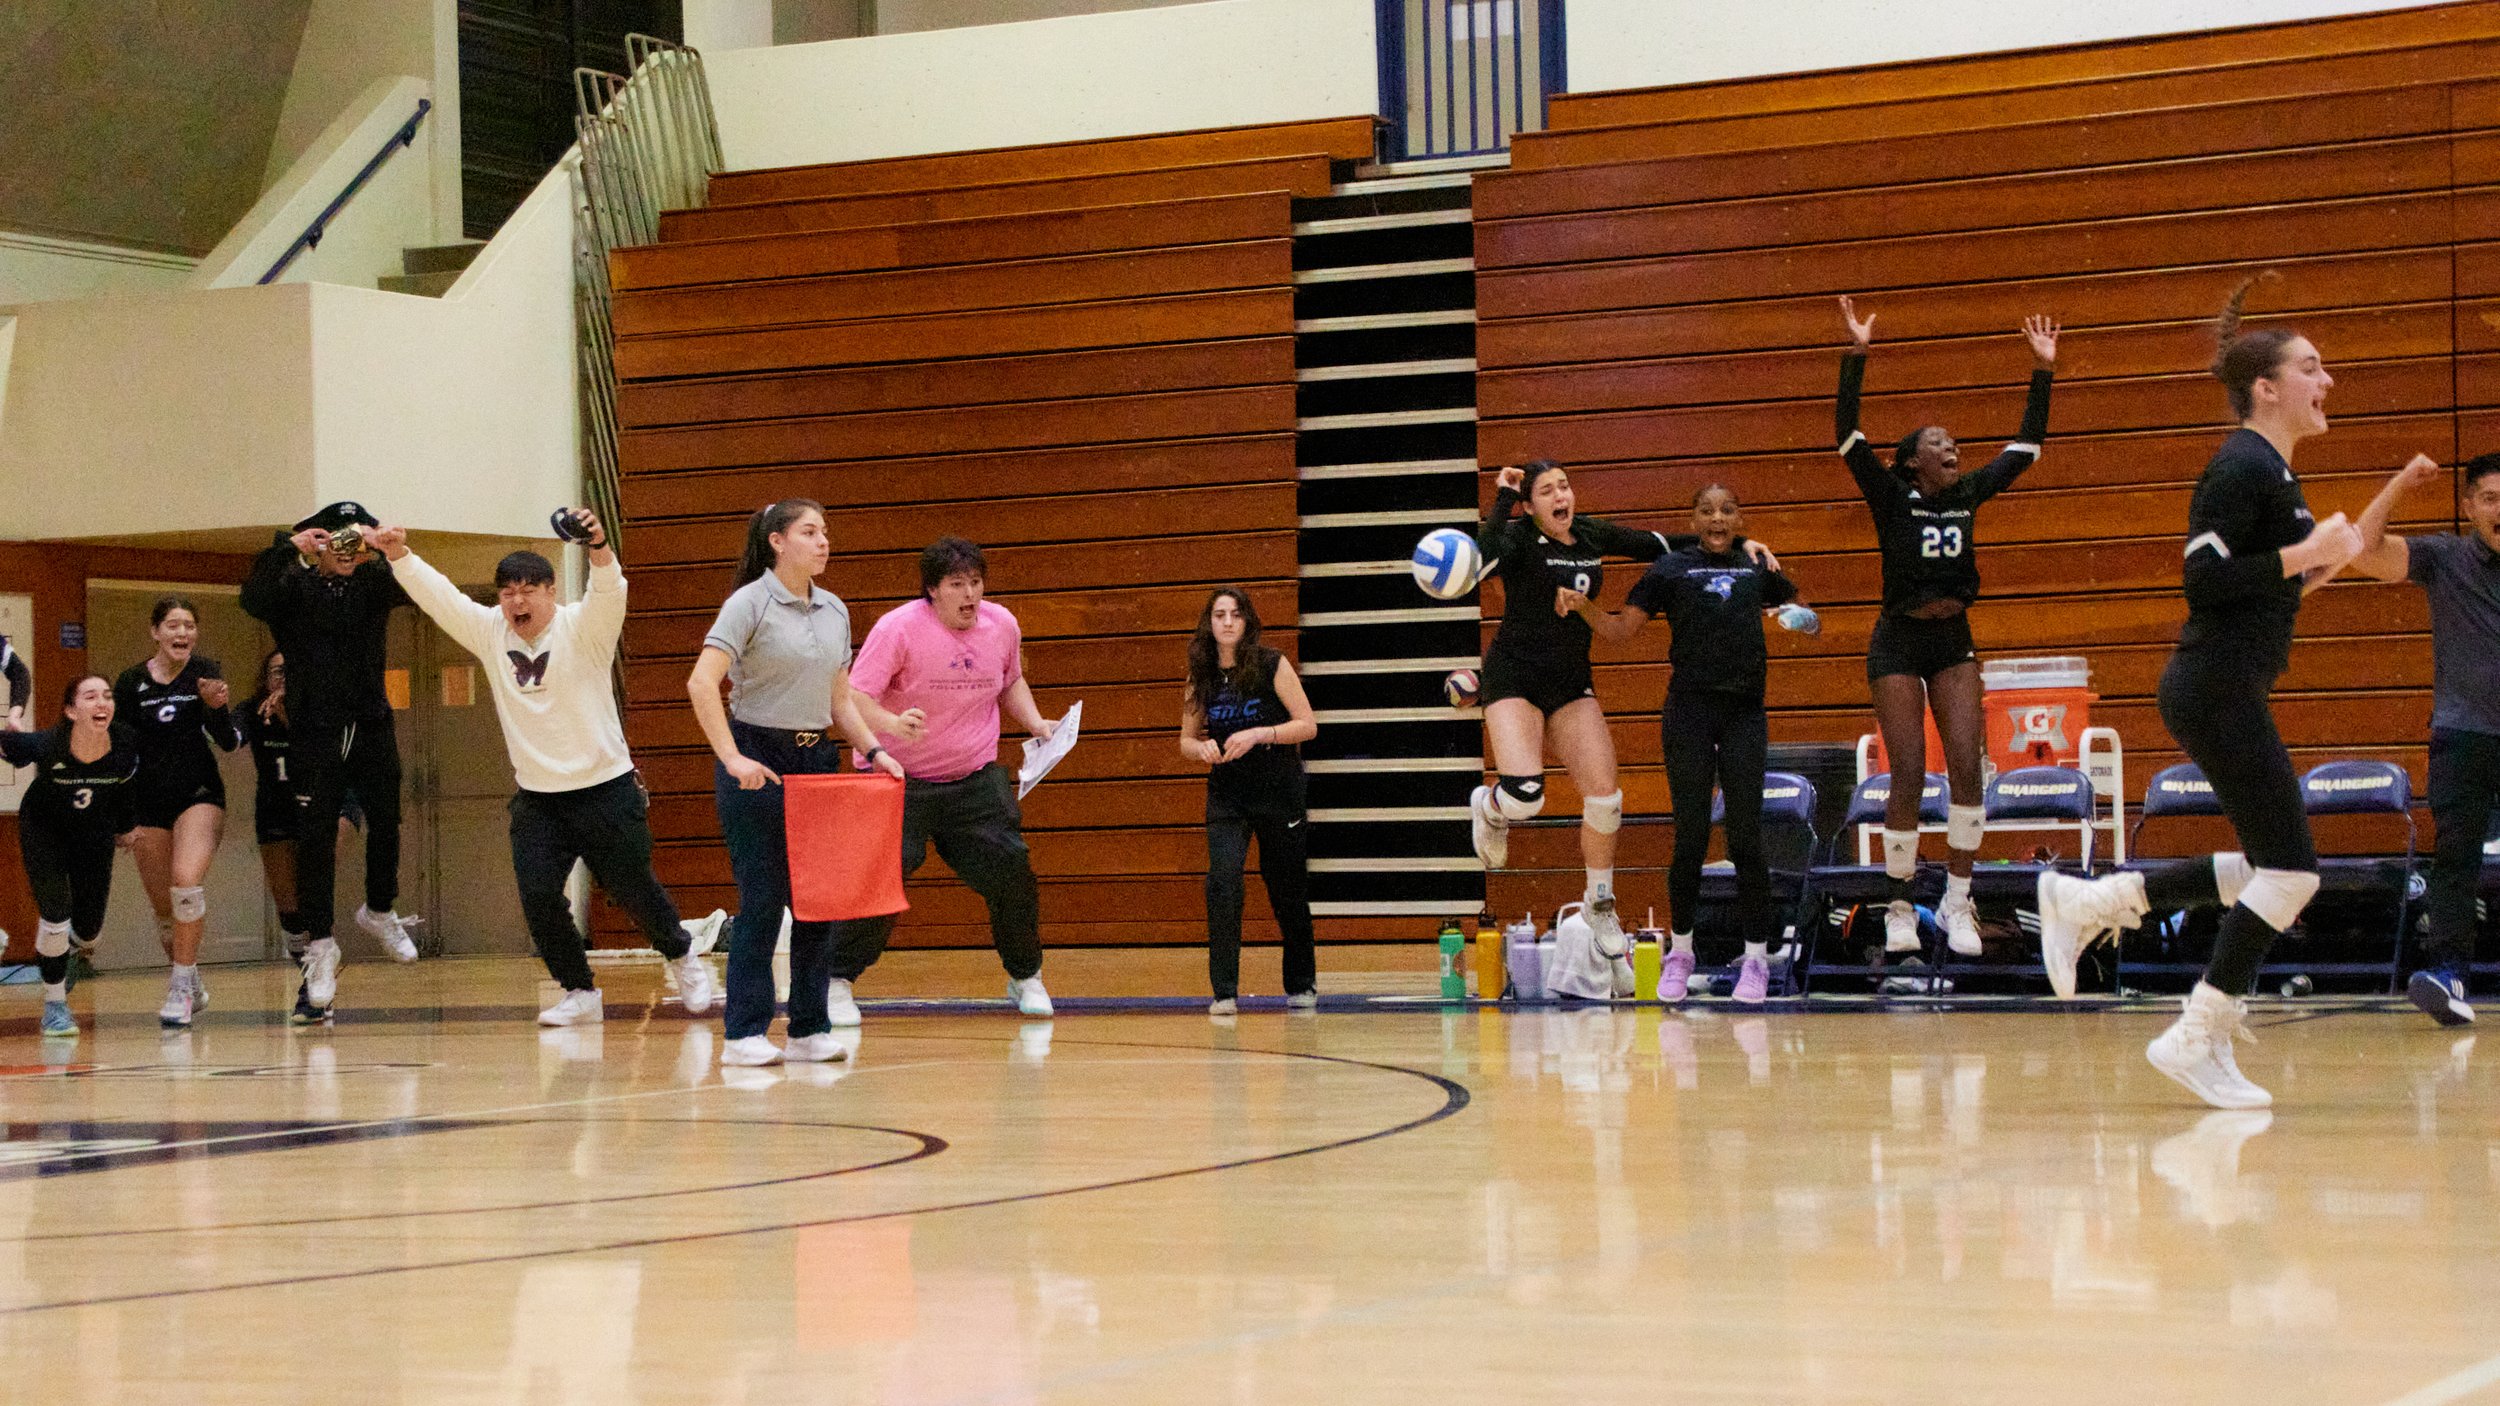  Santa Monica College Corsairs women's volleyball members celebrating in a roar right after the Corsairs won the fifth set during the women's volleyball match against Cypress College Chargers at Cypress College Gymnasium number 2, Cypress, Calif., on